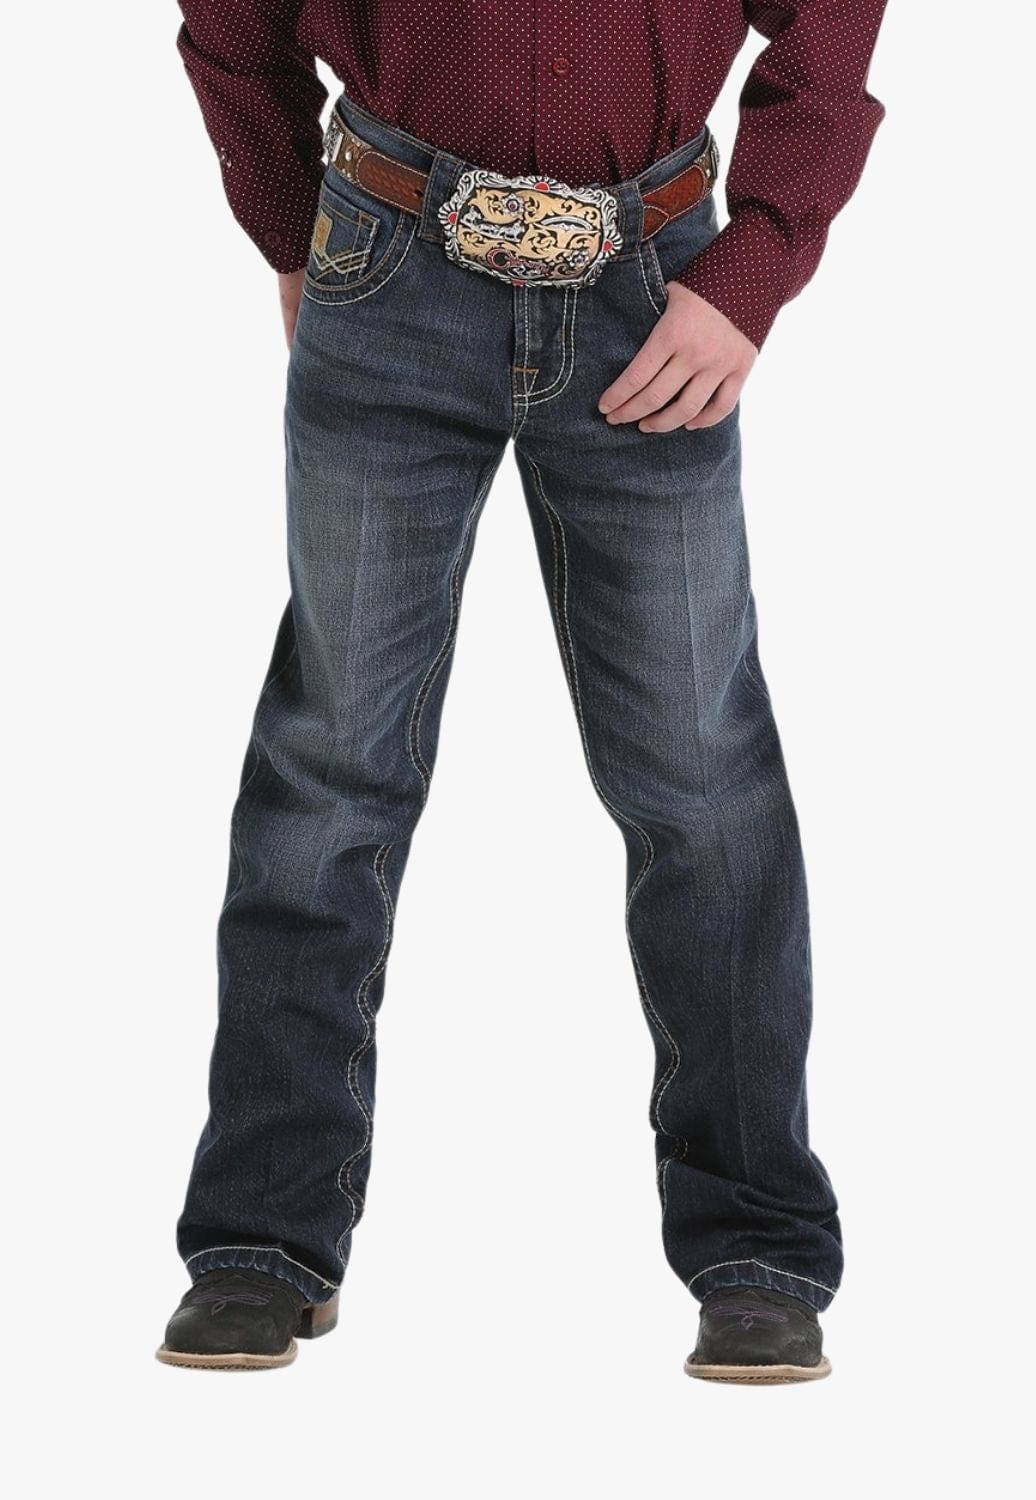 Cinch CLOTHING-Boys Jeans Cinch Boys Youth Relaxed Fit Jean